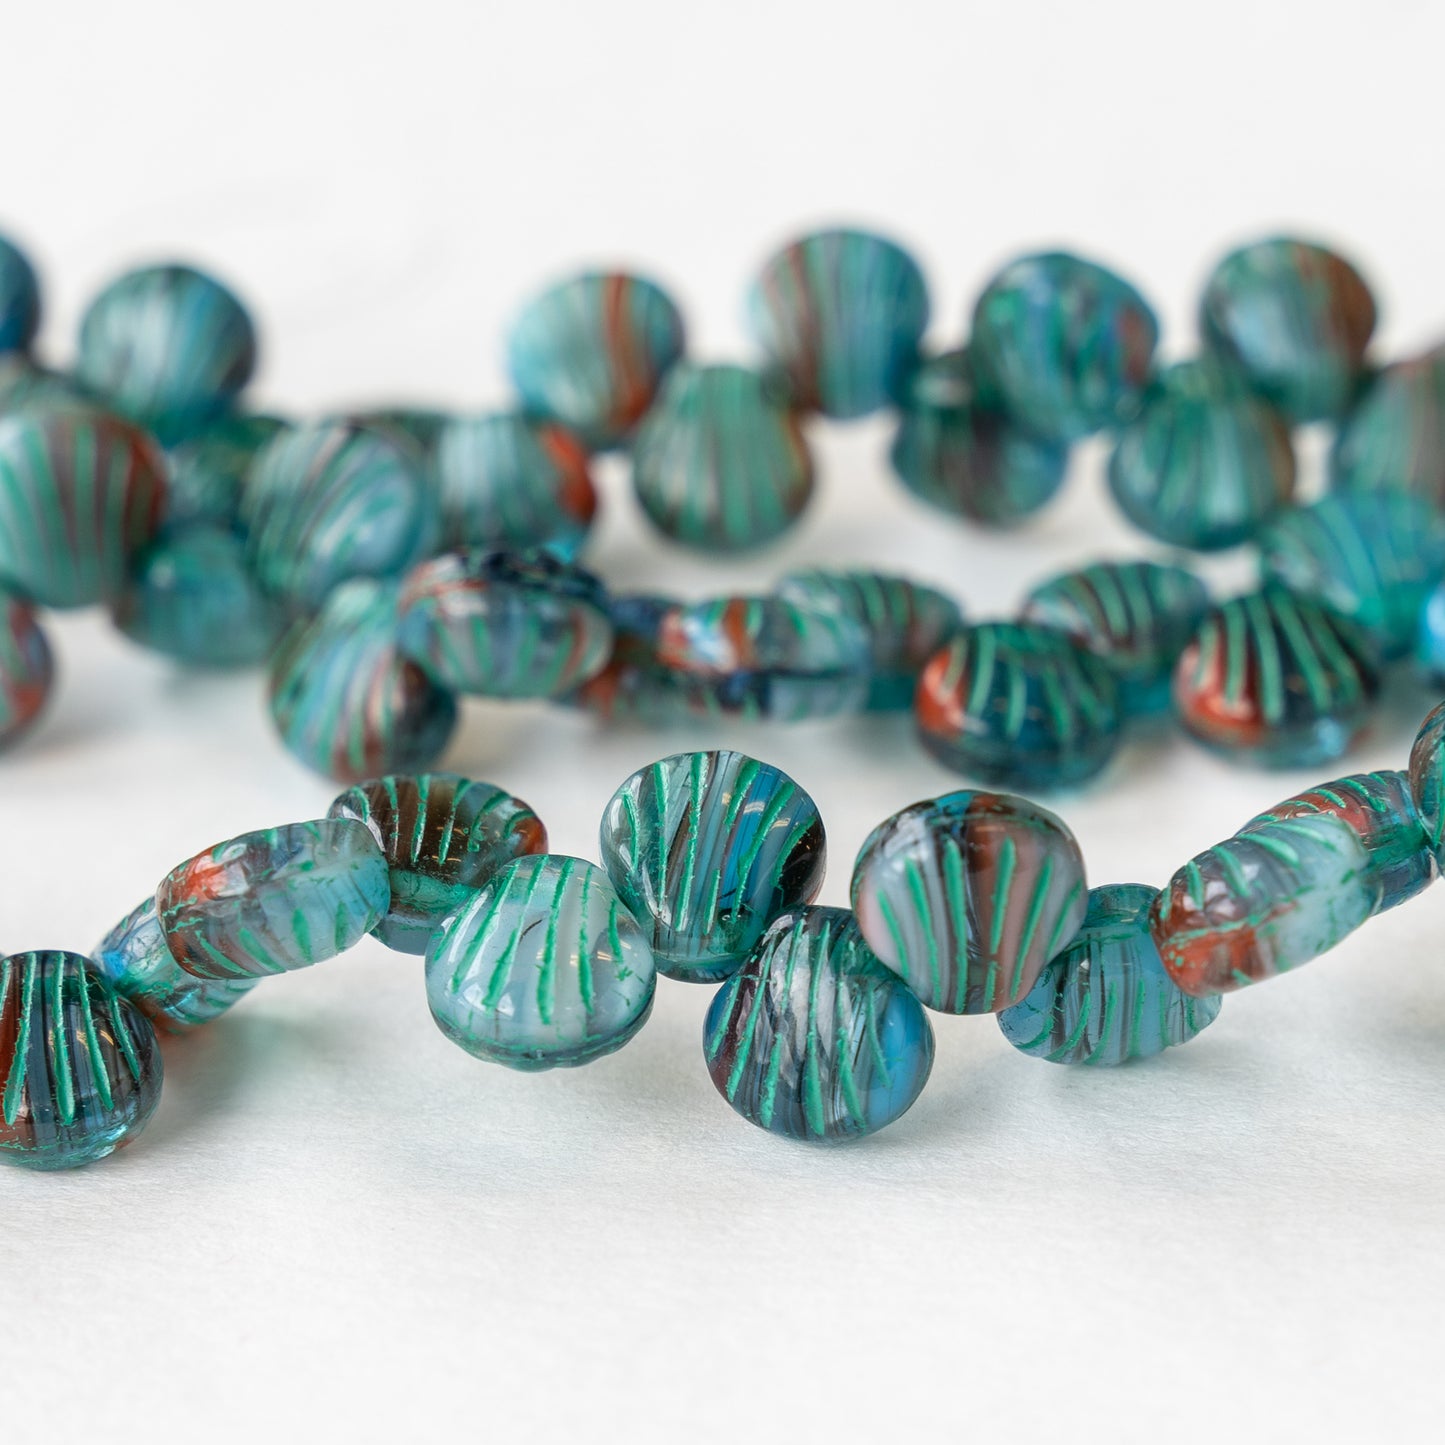 9mm Glass Scallop Beads - Marbled Blue and Amber - 20 Beads